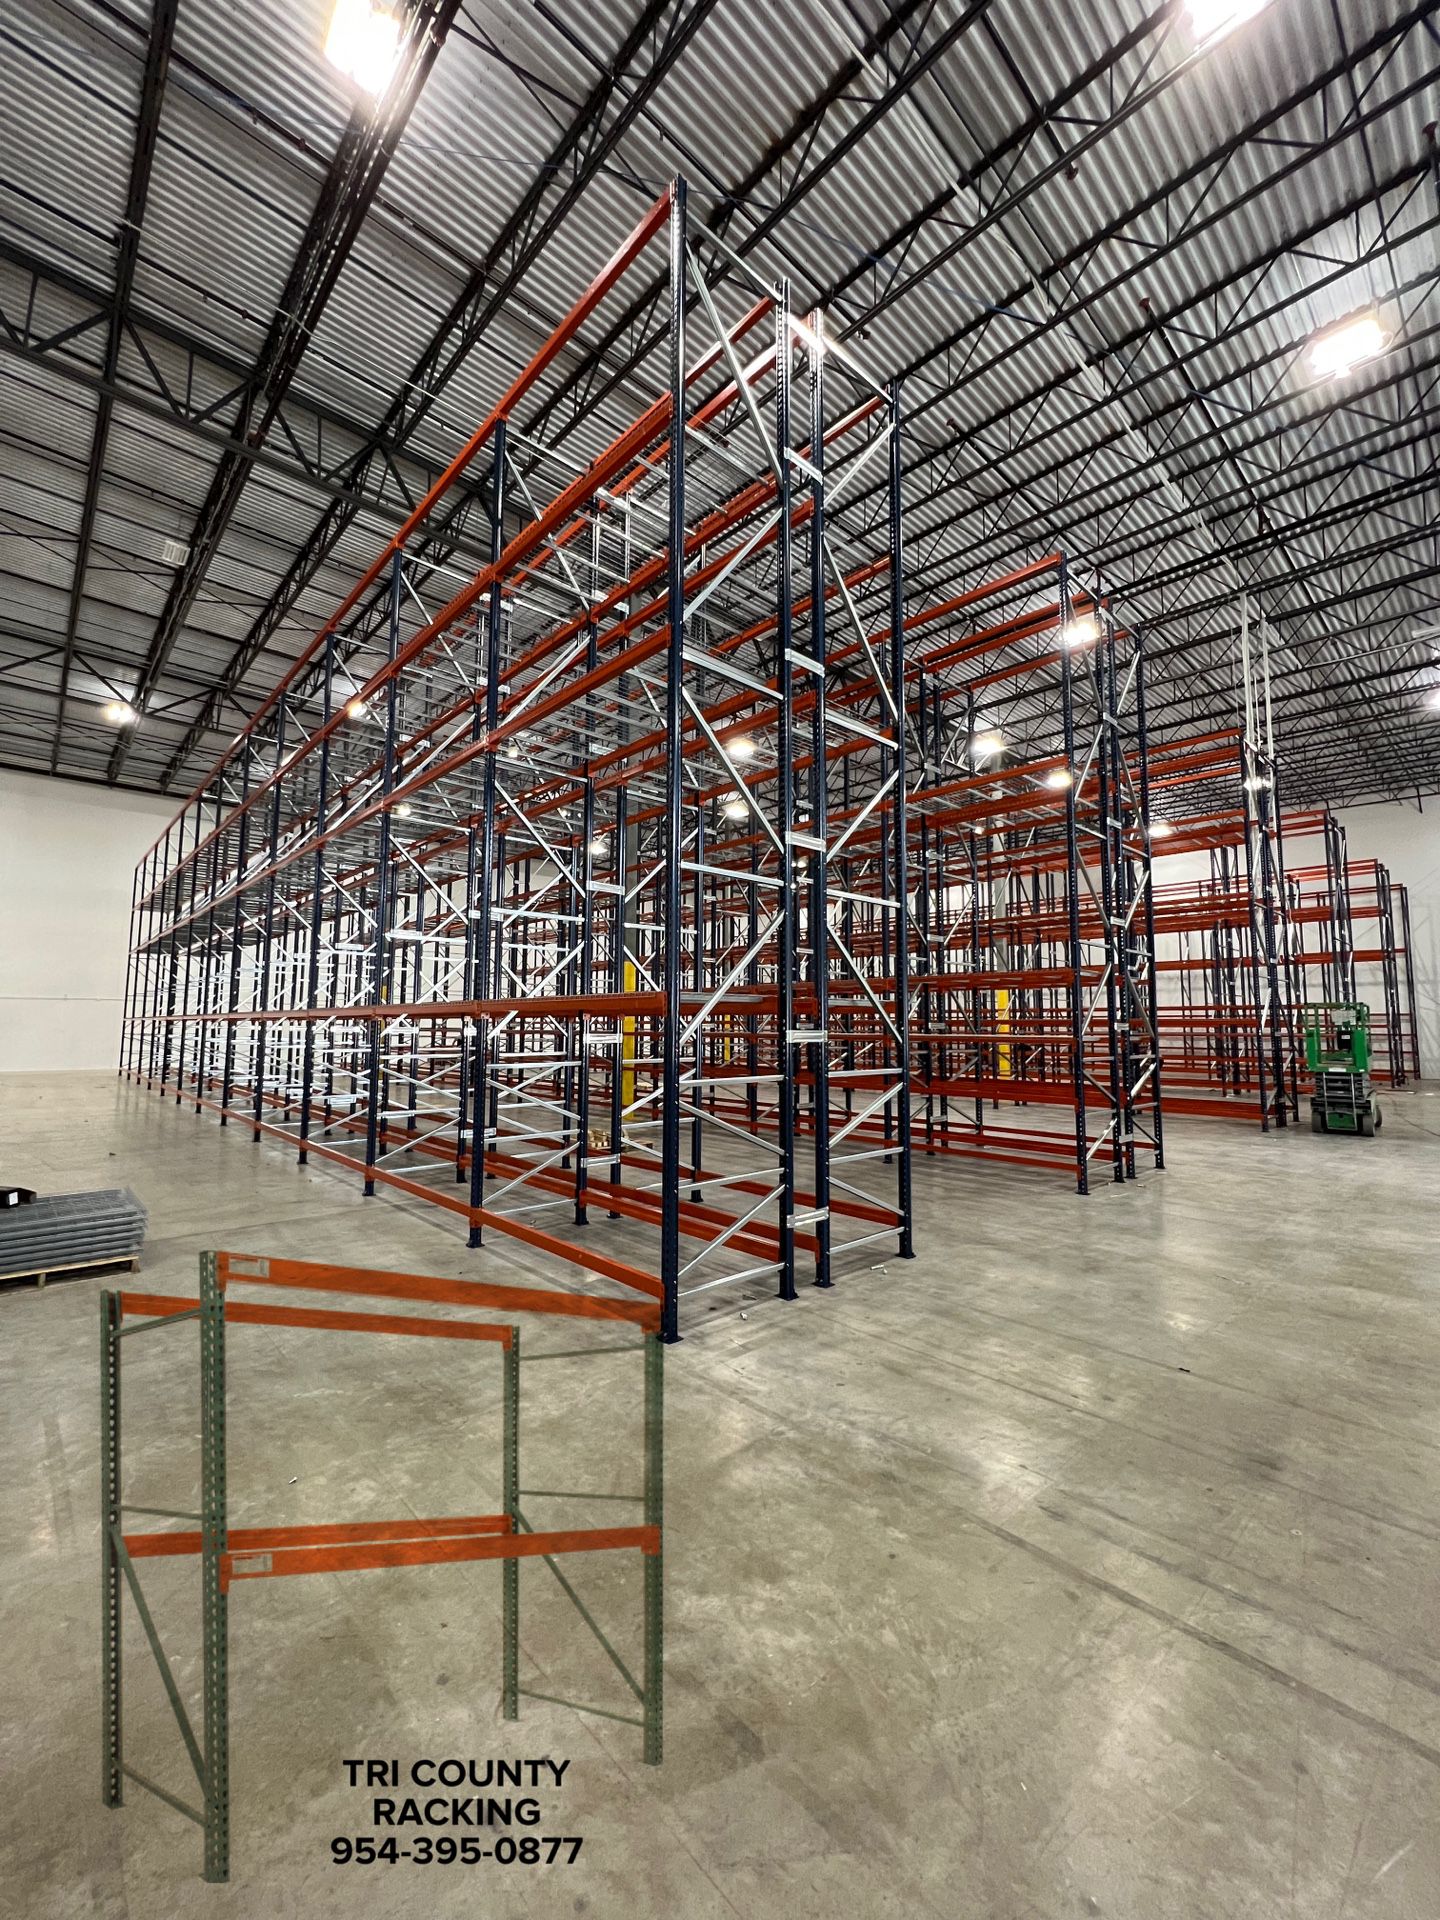 Pallet Racks Beams Uprights Wire Decks Delivery Install Export Forklifts 